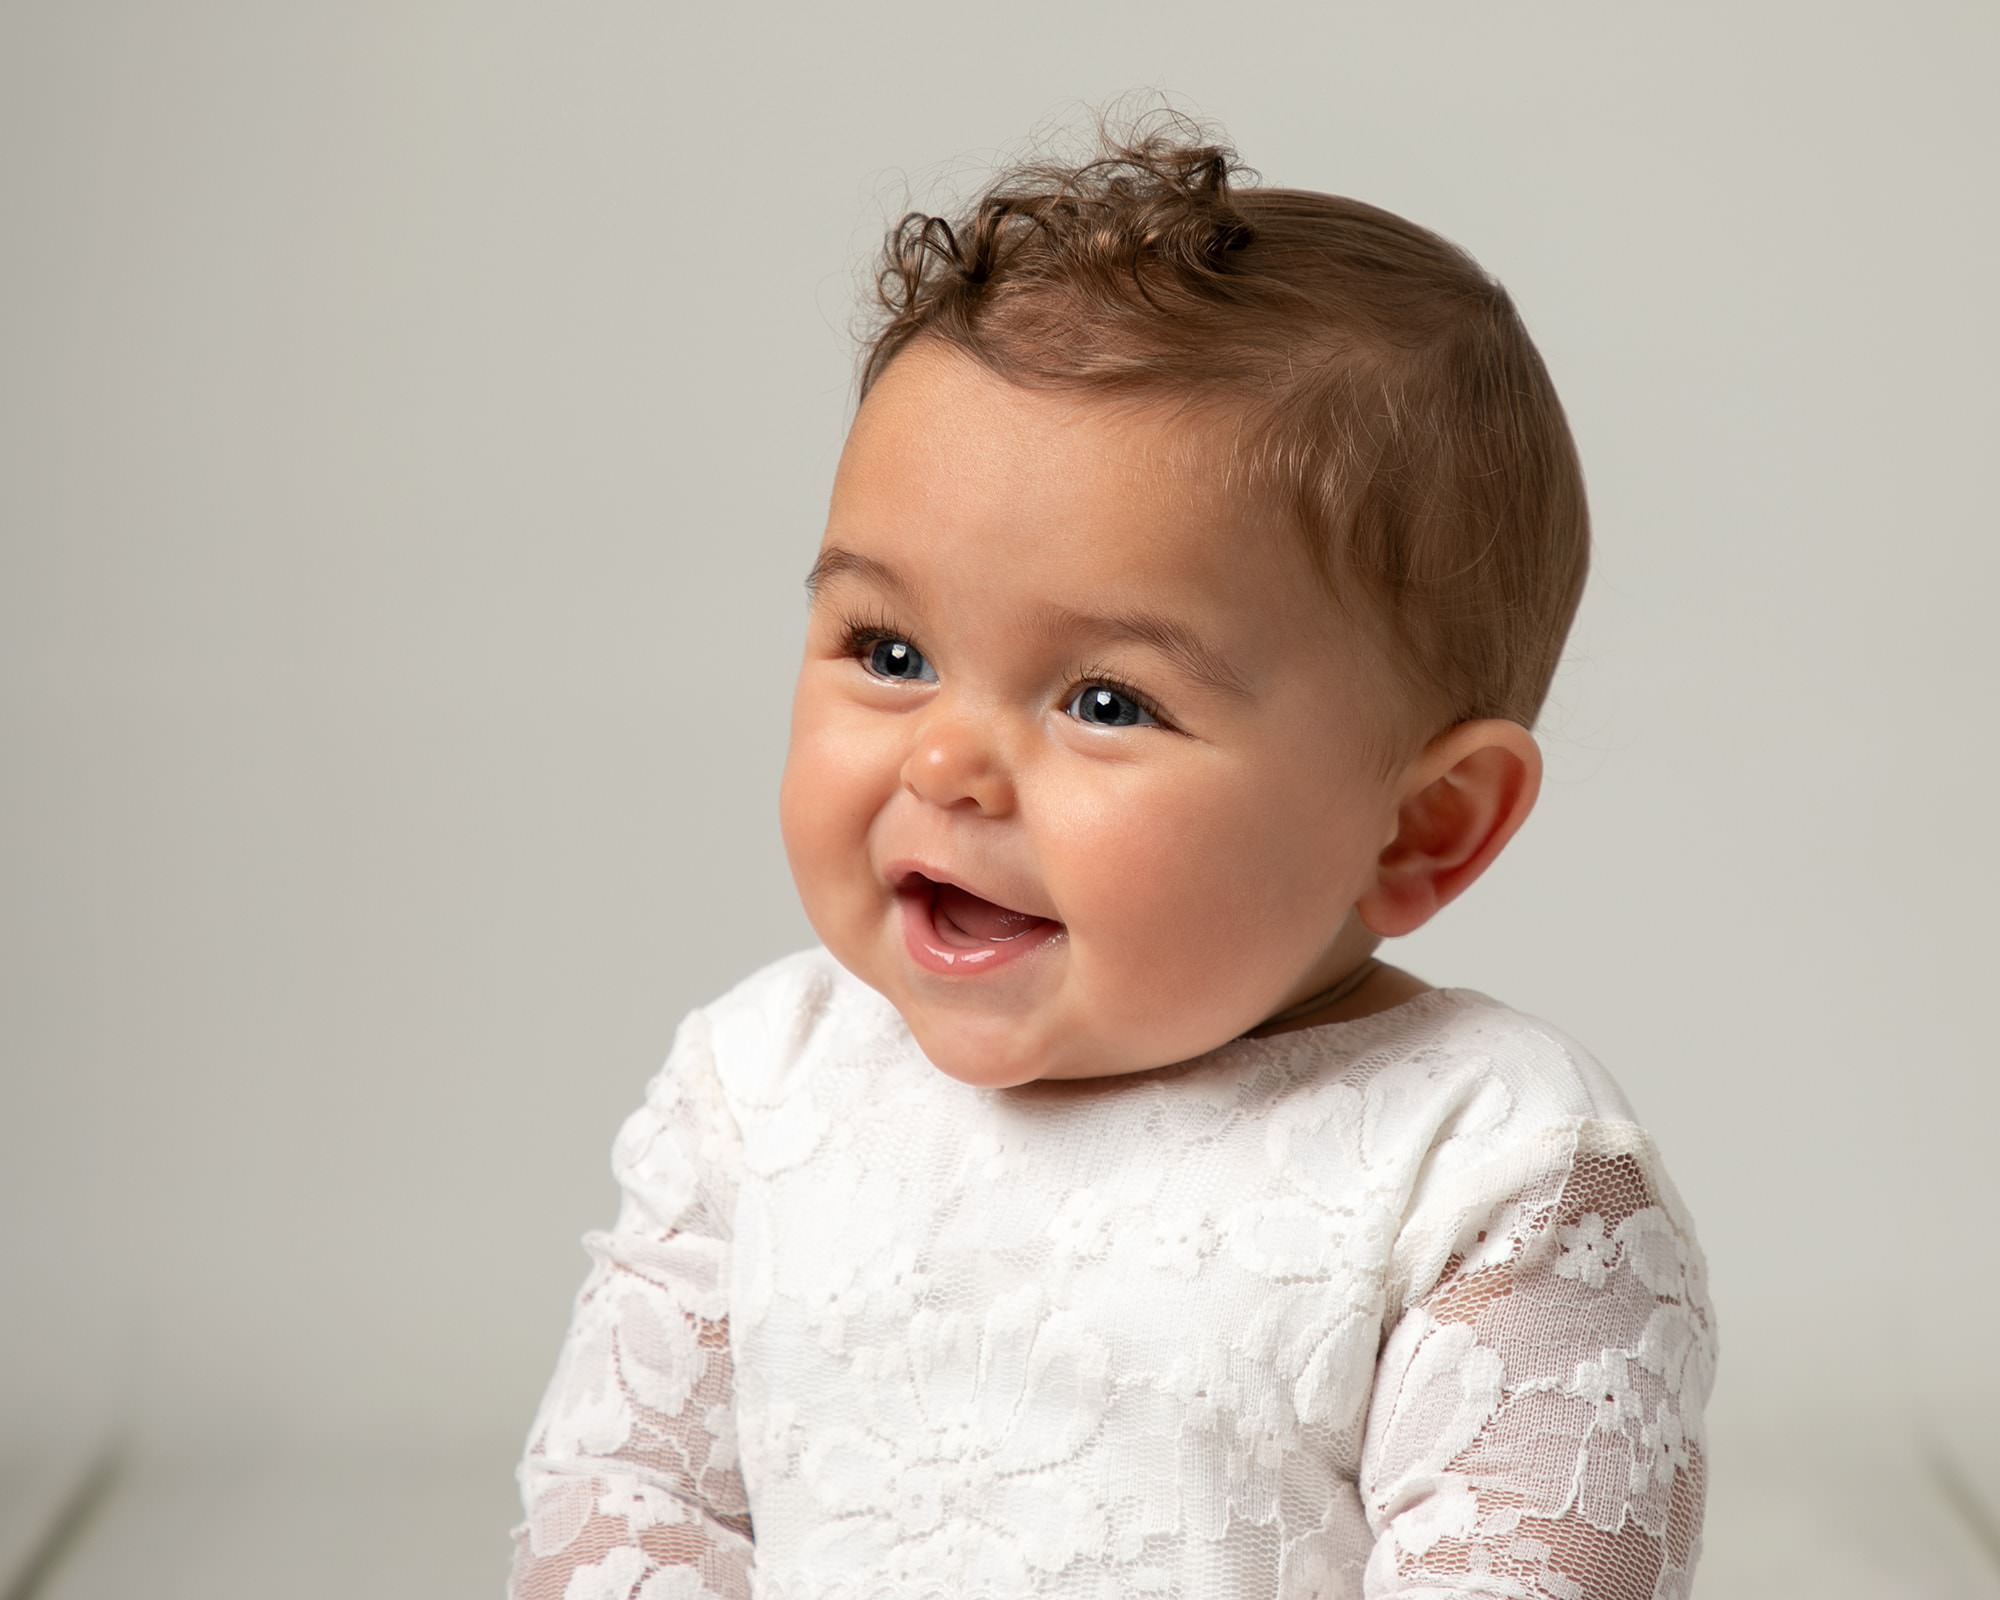 Baby girl with short curls wearing a white romper smiling. Image taken at Glasgow baby photography shoot